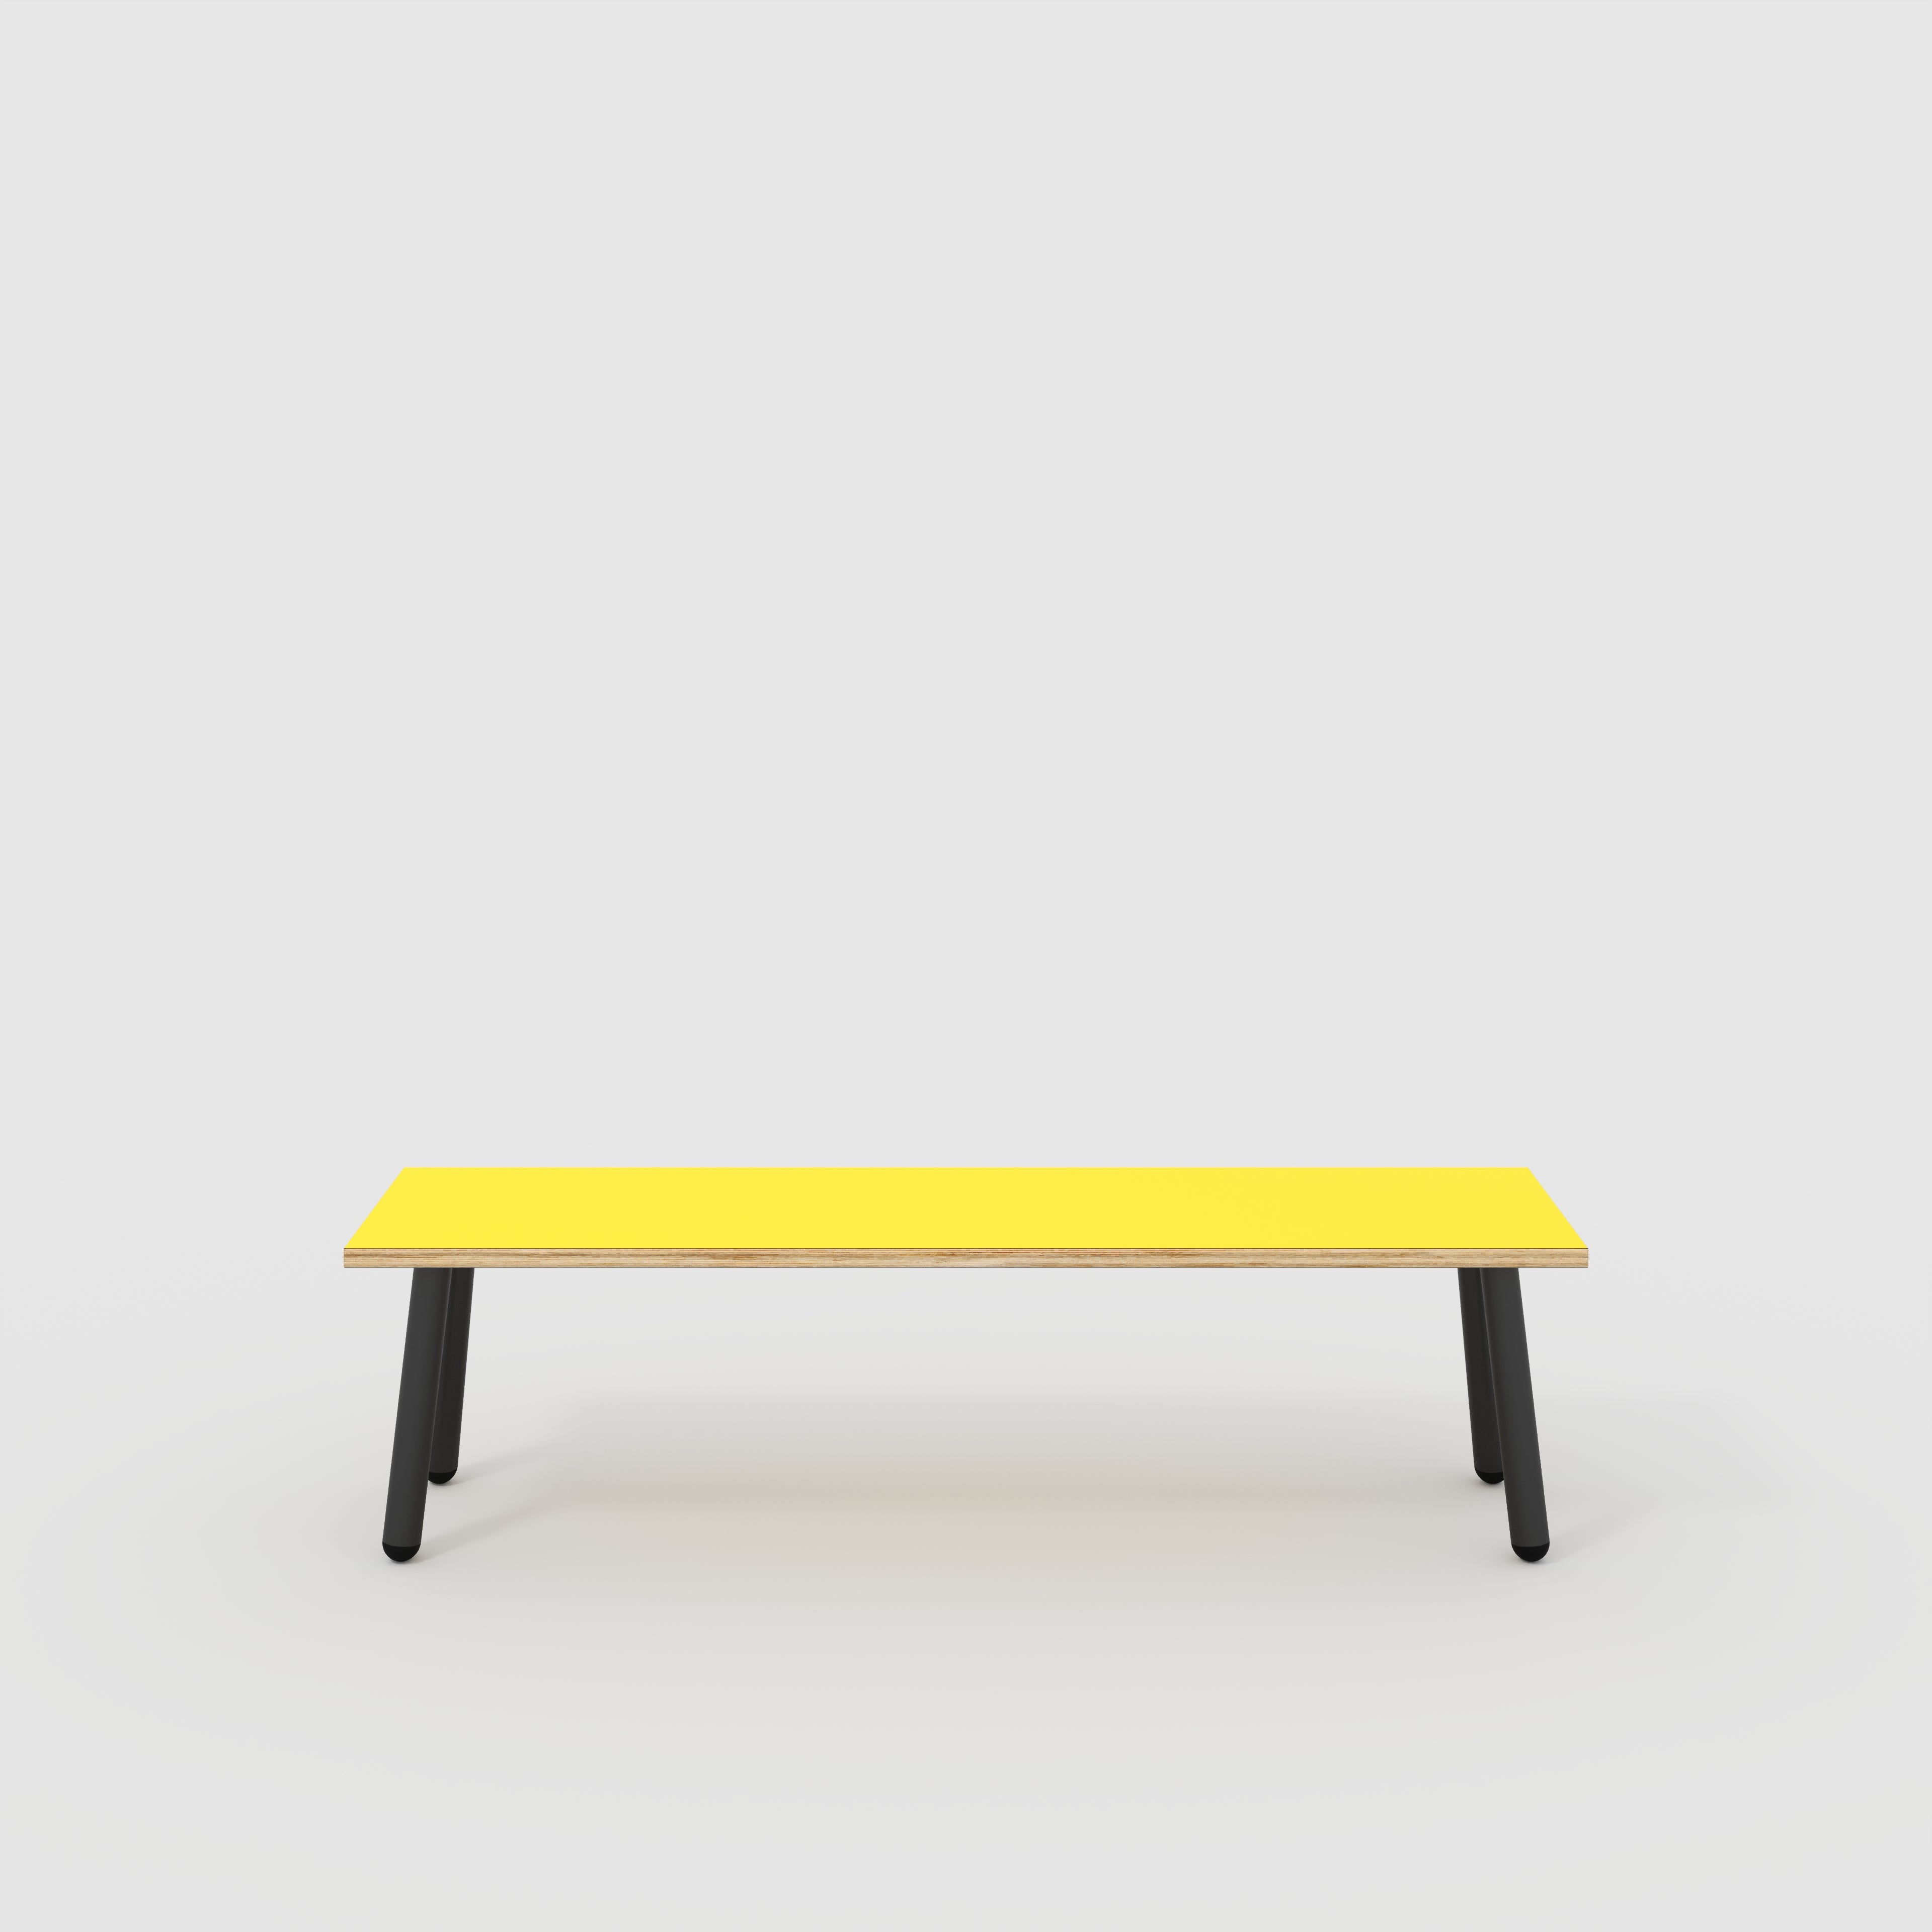 Bench Seat with Black Round Single Pin Legs - Formica Chrome Yellow - 1600(w) x 400(d)